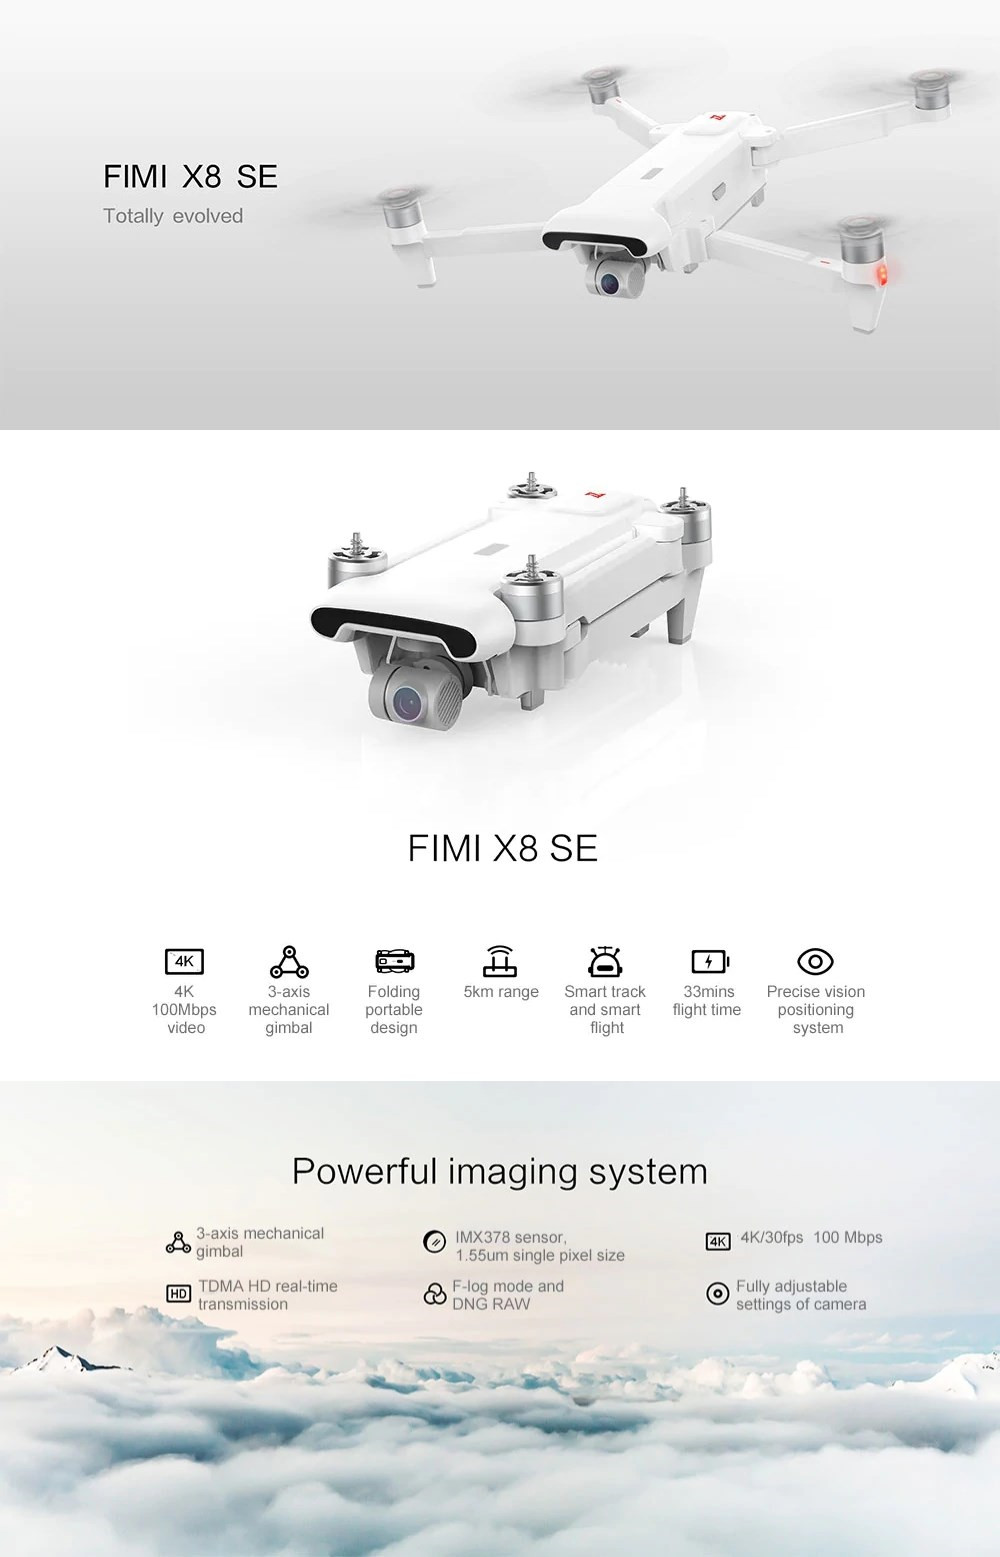 Xiaomi-FIMI-X8-SE-5KM-FPV-With-3-axis-Gimbal-4K-Camera-GPS-33mins-Flight-Time-RC-Drone-Quadcopter-RT-1394905